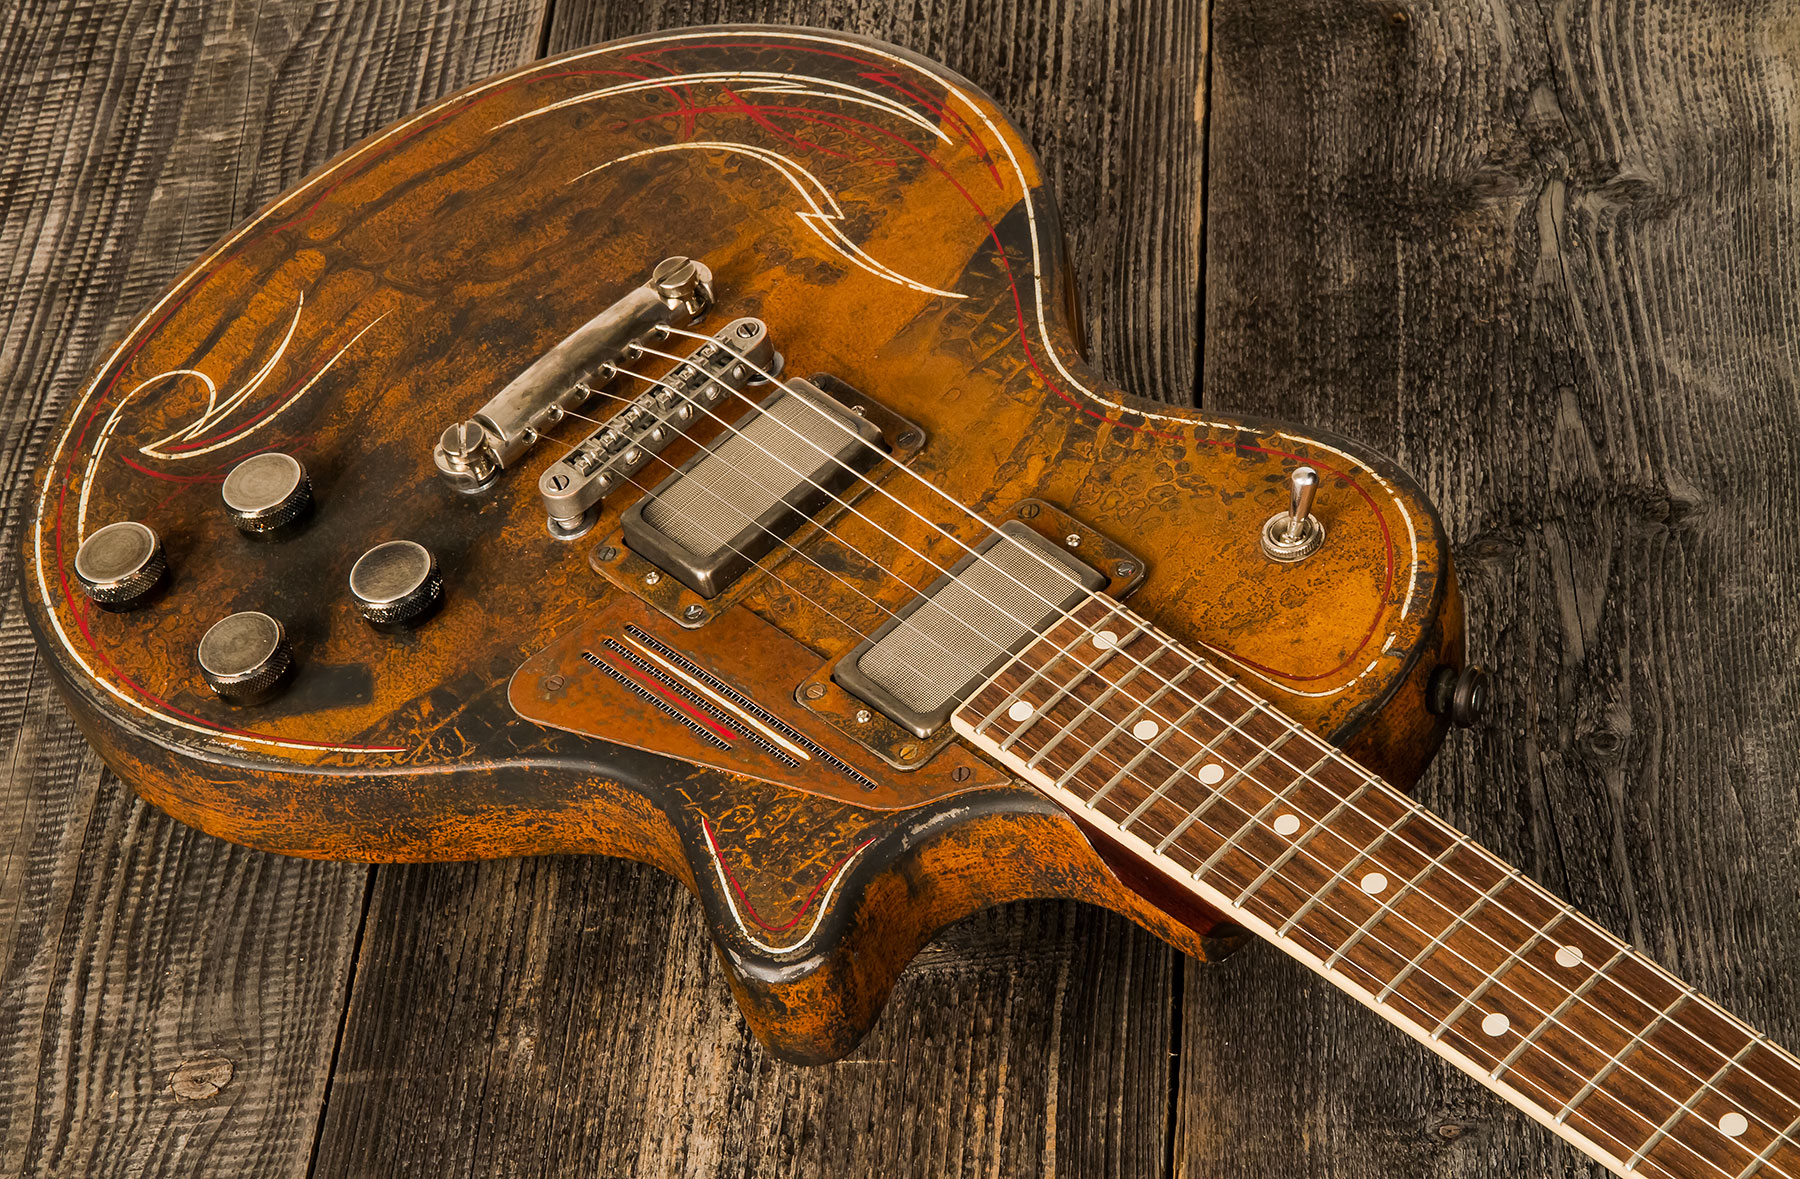 James Trussart Steeldeville Perf.back 2h Ht Rw #21171 - Rust O Matic Pinstriped - Single cut electric guitar - Variation 1